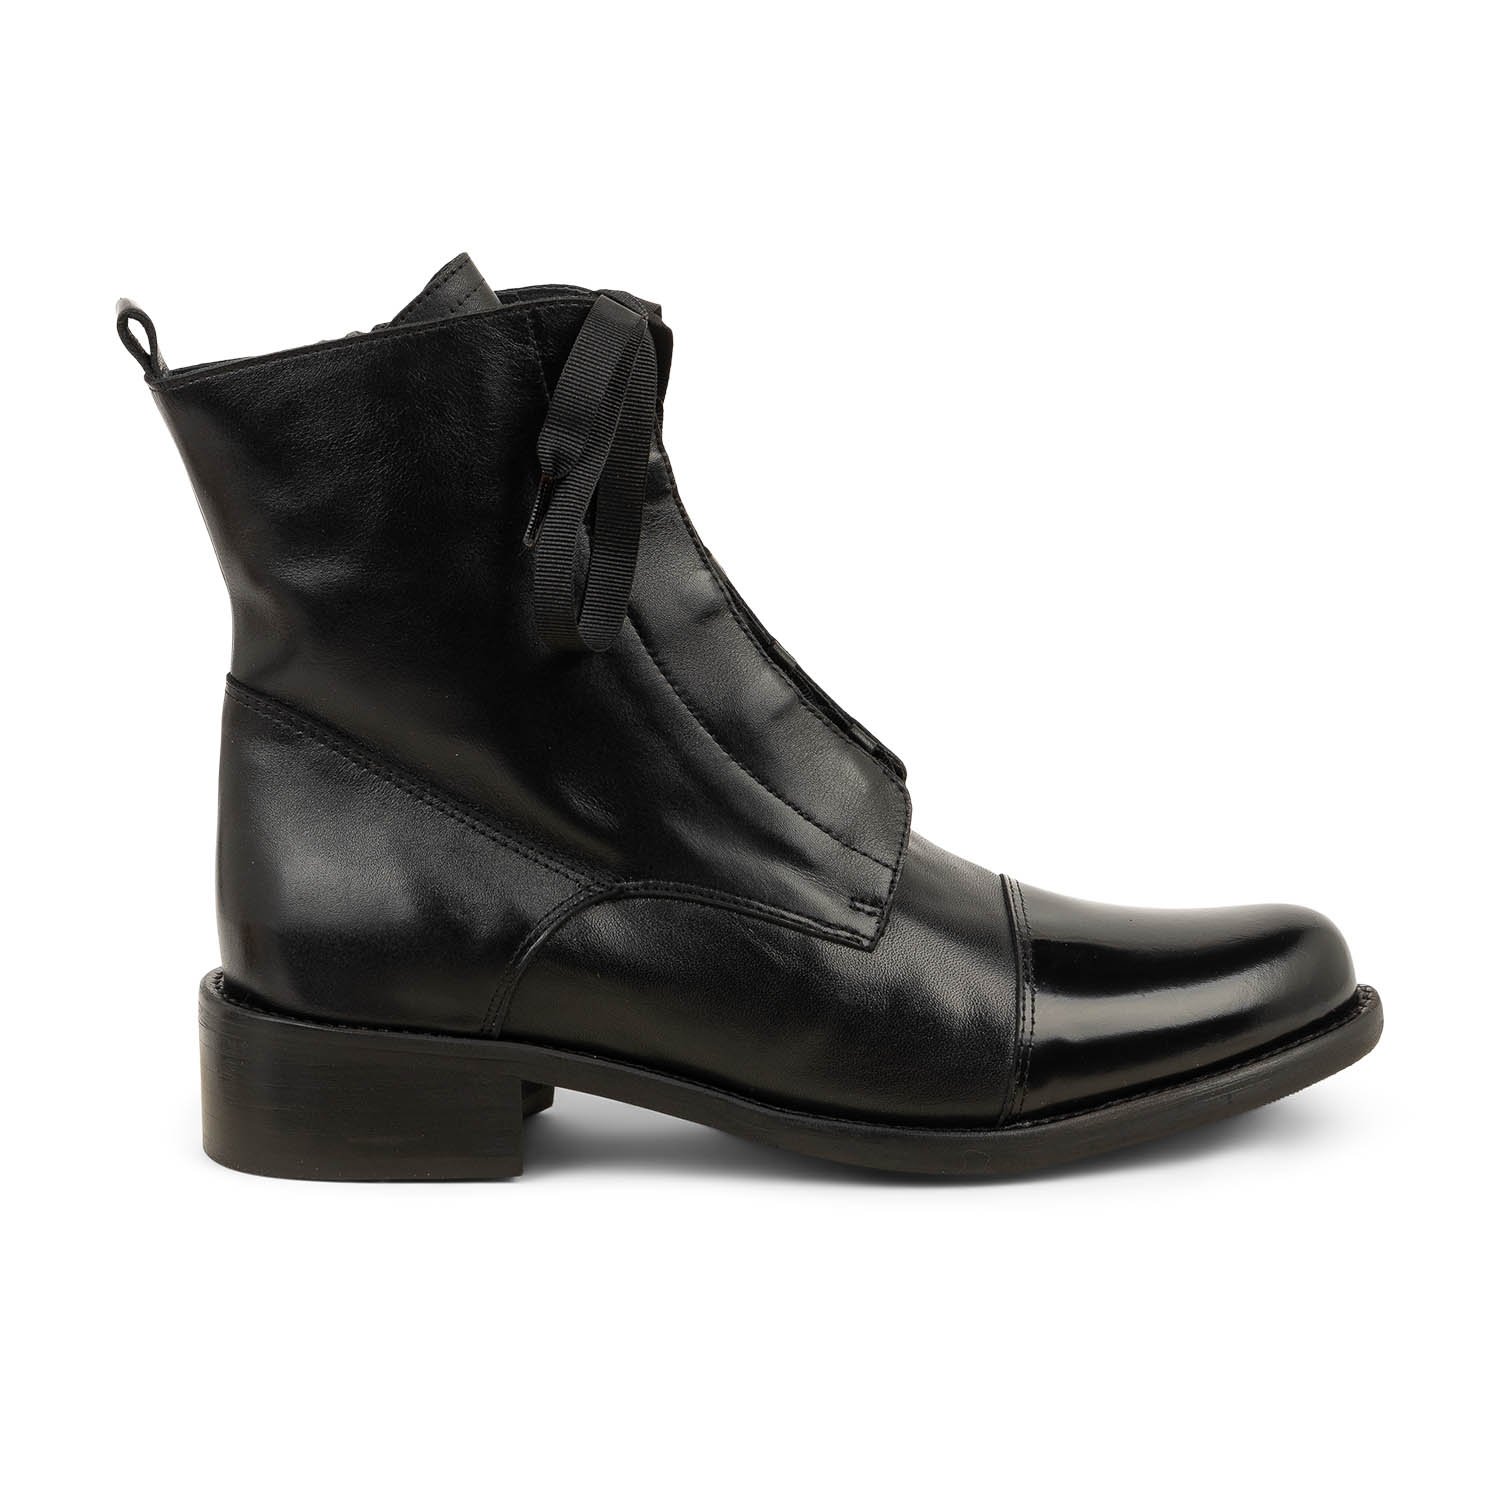 01 - MYSTYLE - MYMA - Boots et bottines - Cuir